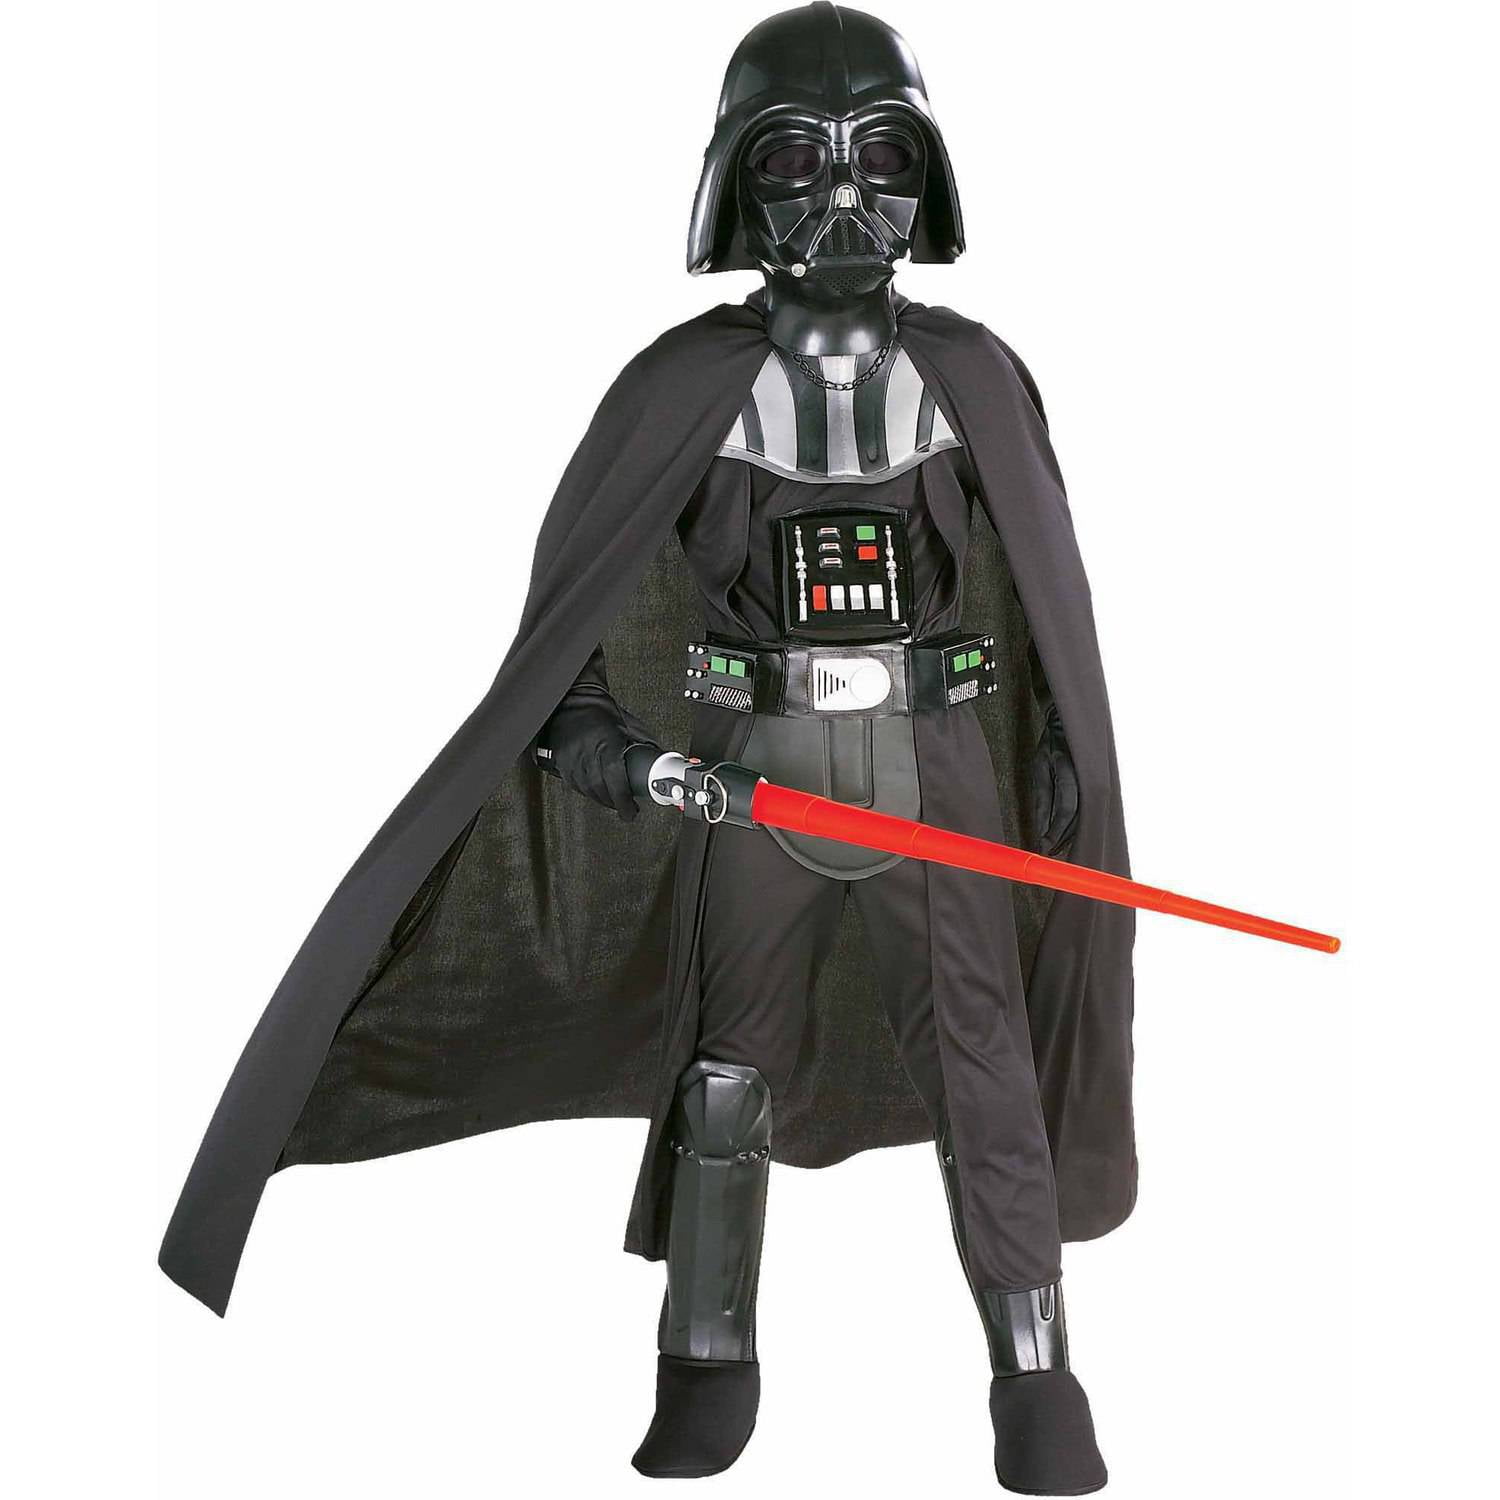 Kids Darth Vader Mask And Cape Costume Child Boys Star War Halloween Accessory